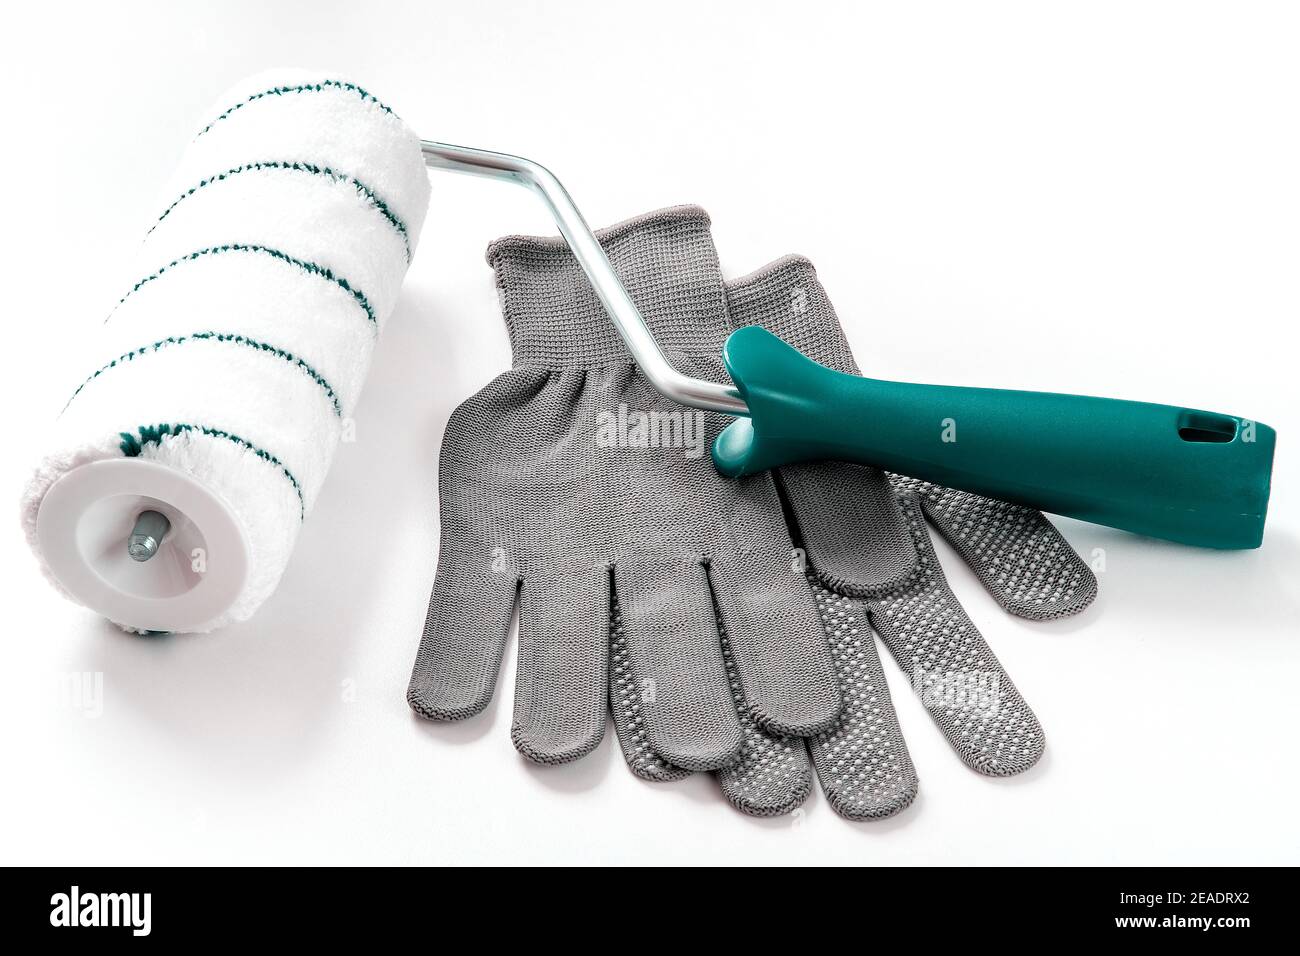 Paint roller, protective gloves, everything for repair and painting Stock Photo